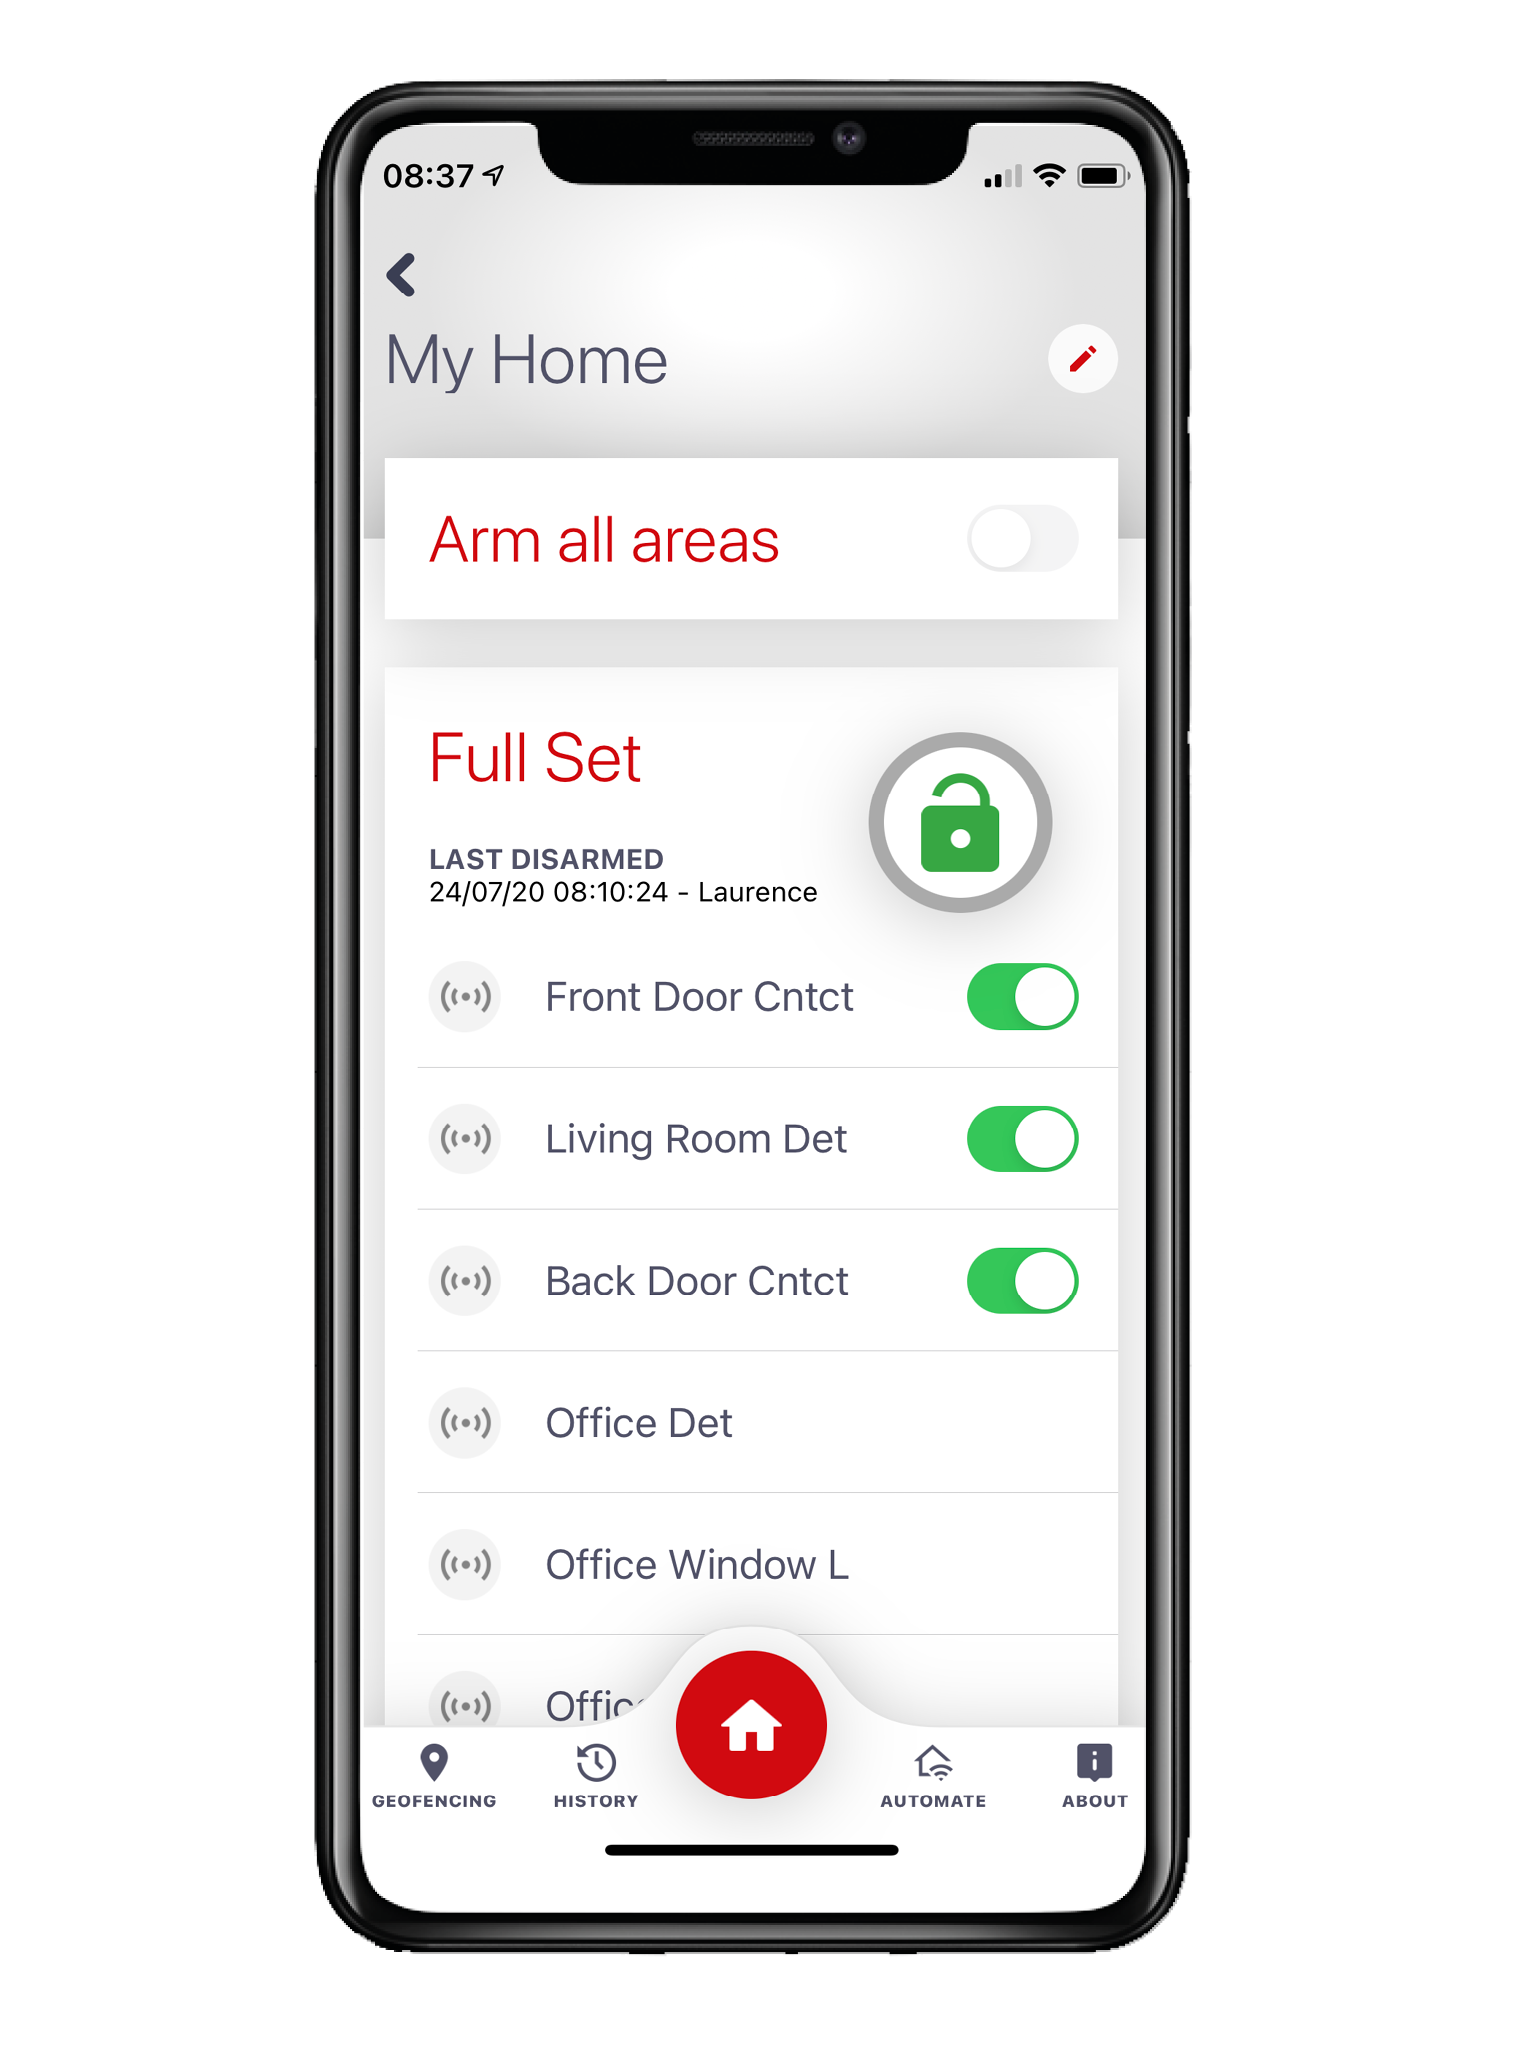 An image of a smart phone showing the app for the intruder alarm